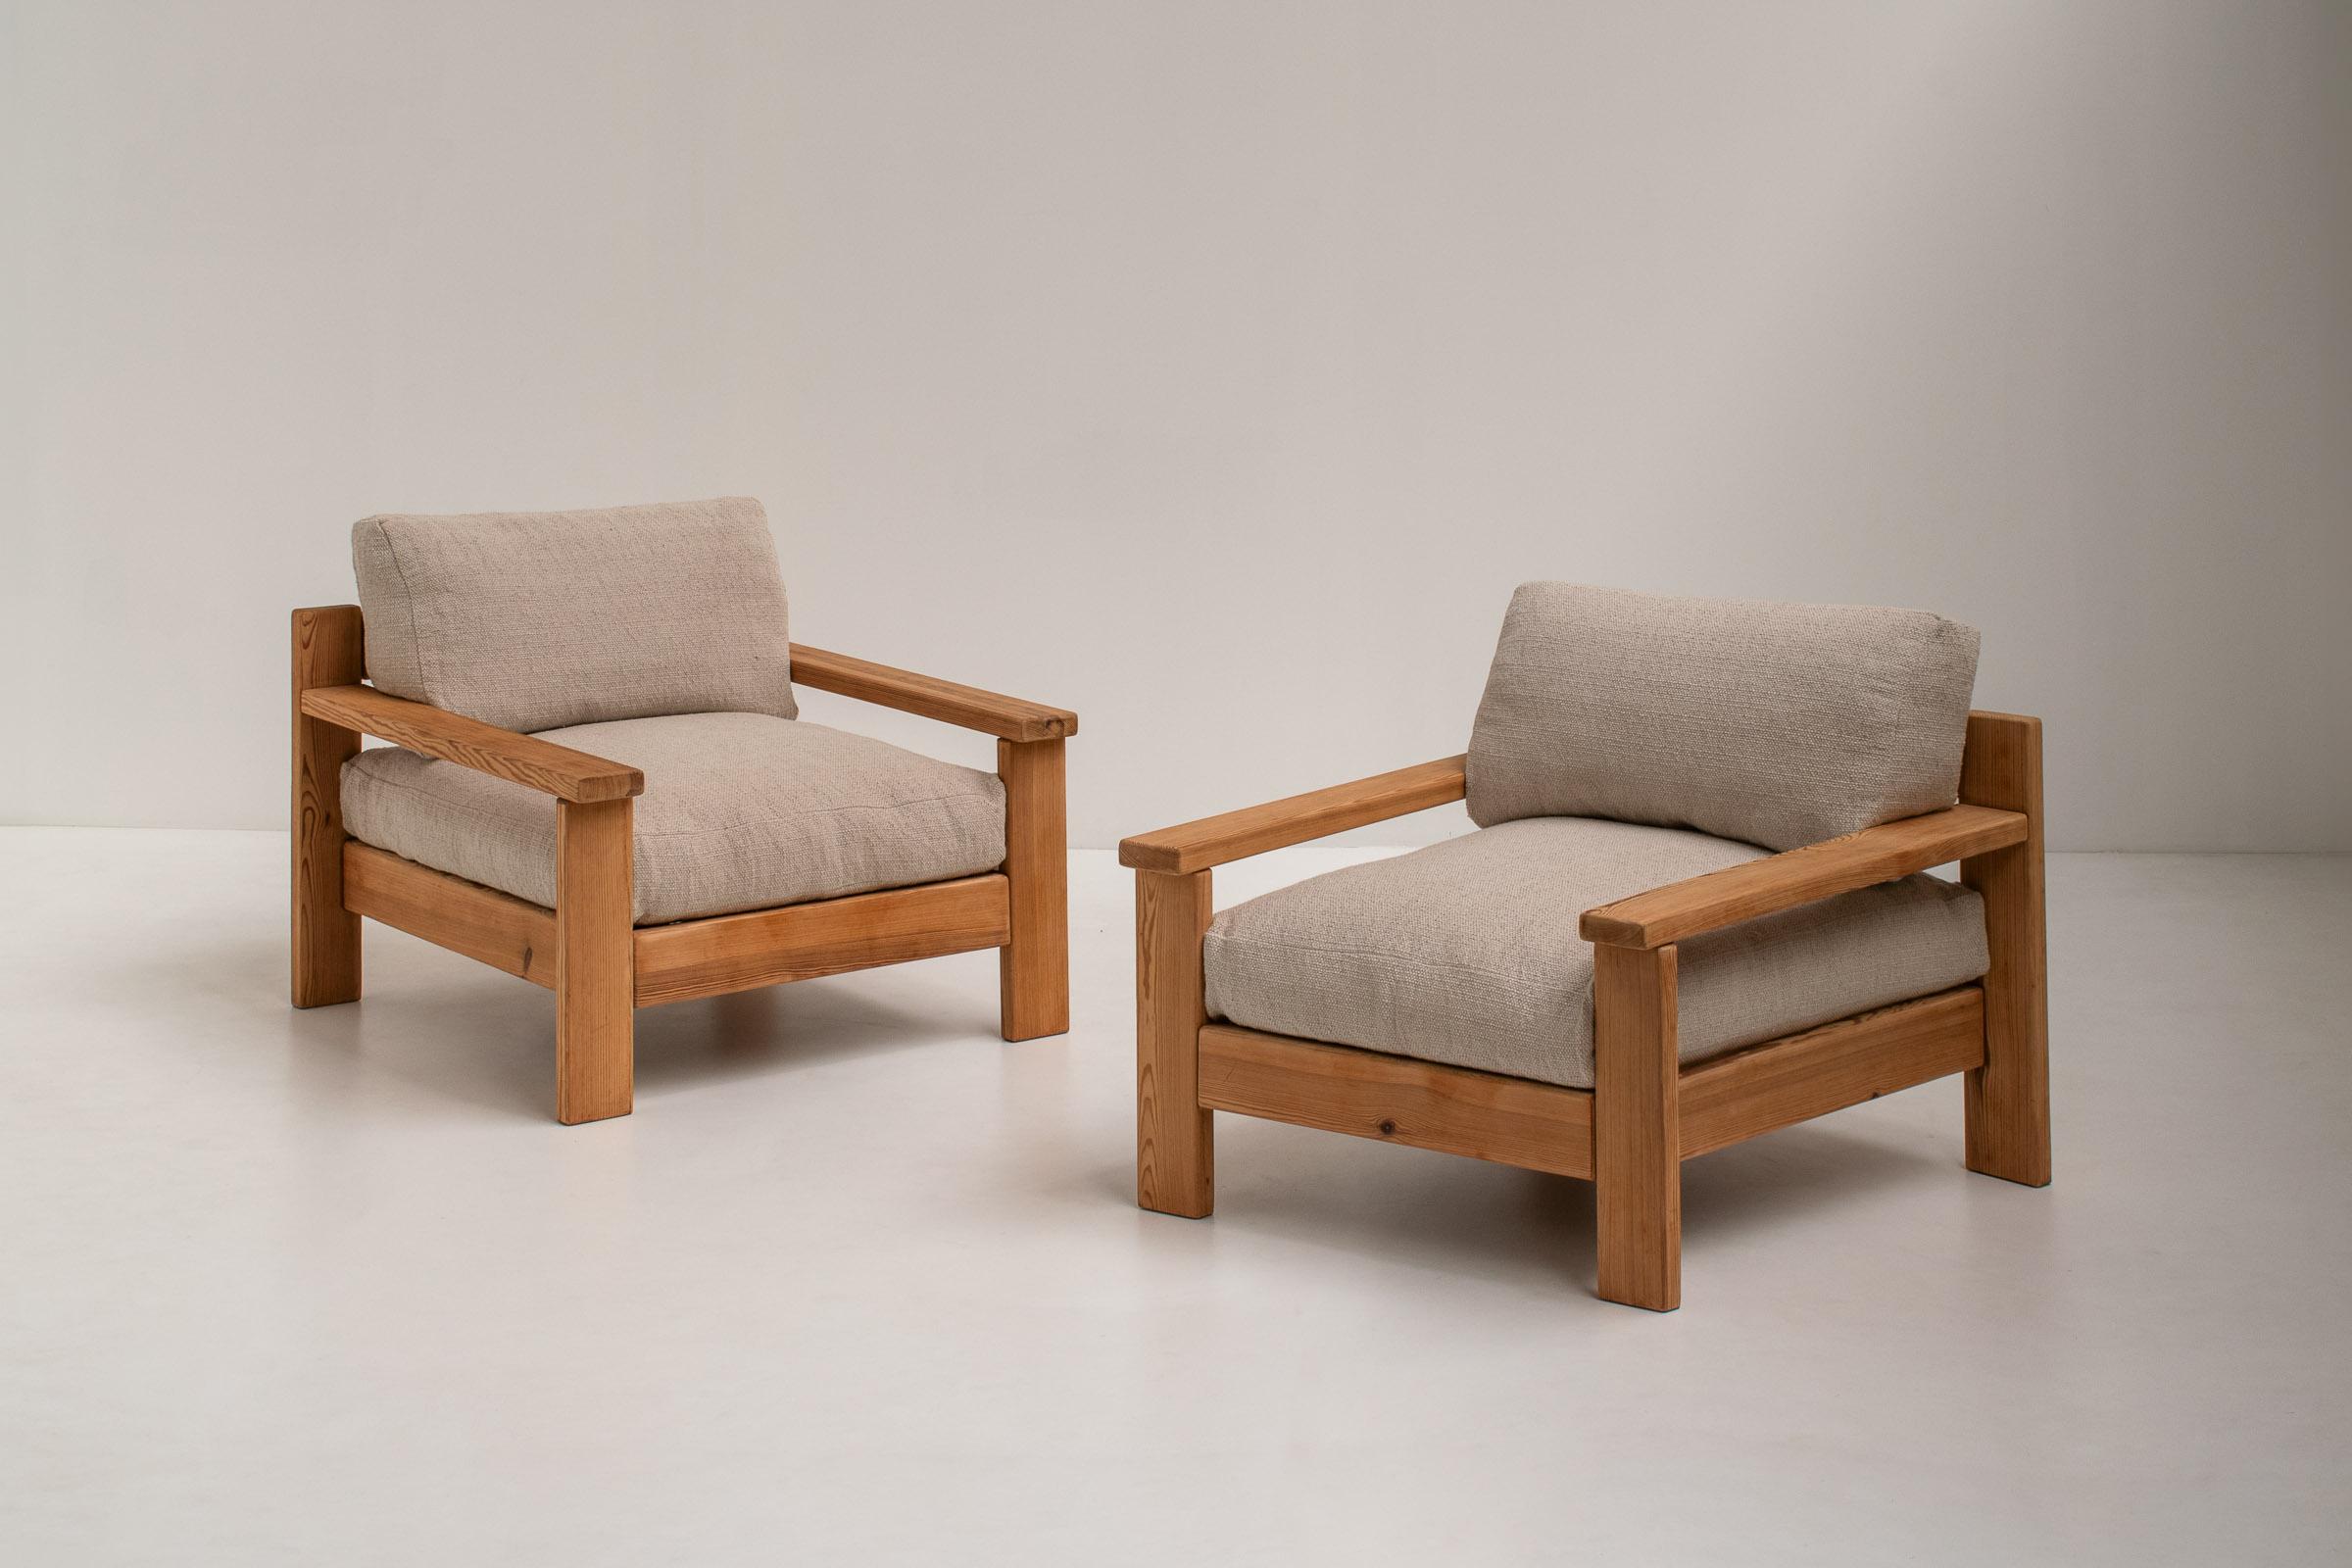 Mid-Century Modern Minimalistic Mid-century Modern Lounge Chairs in Natural Wood, Italy, 1970s For Sale